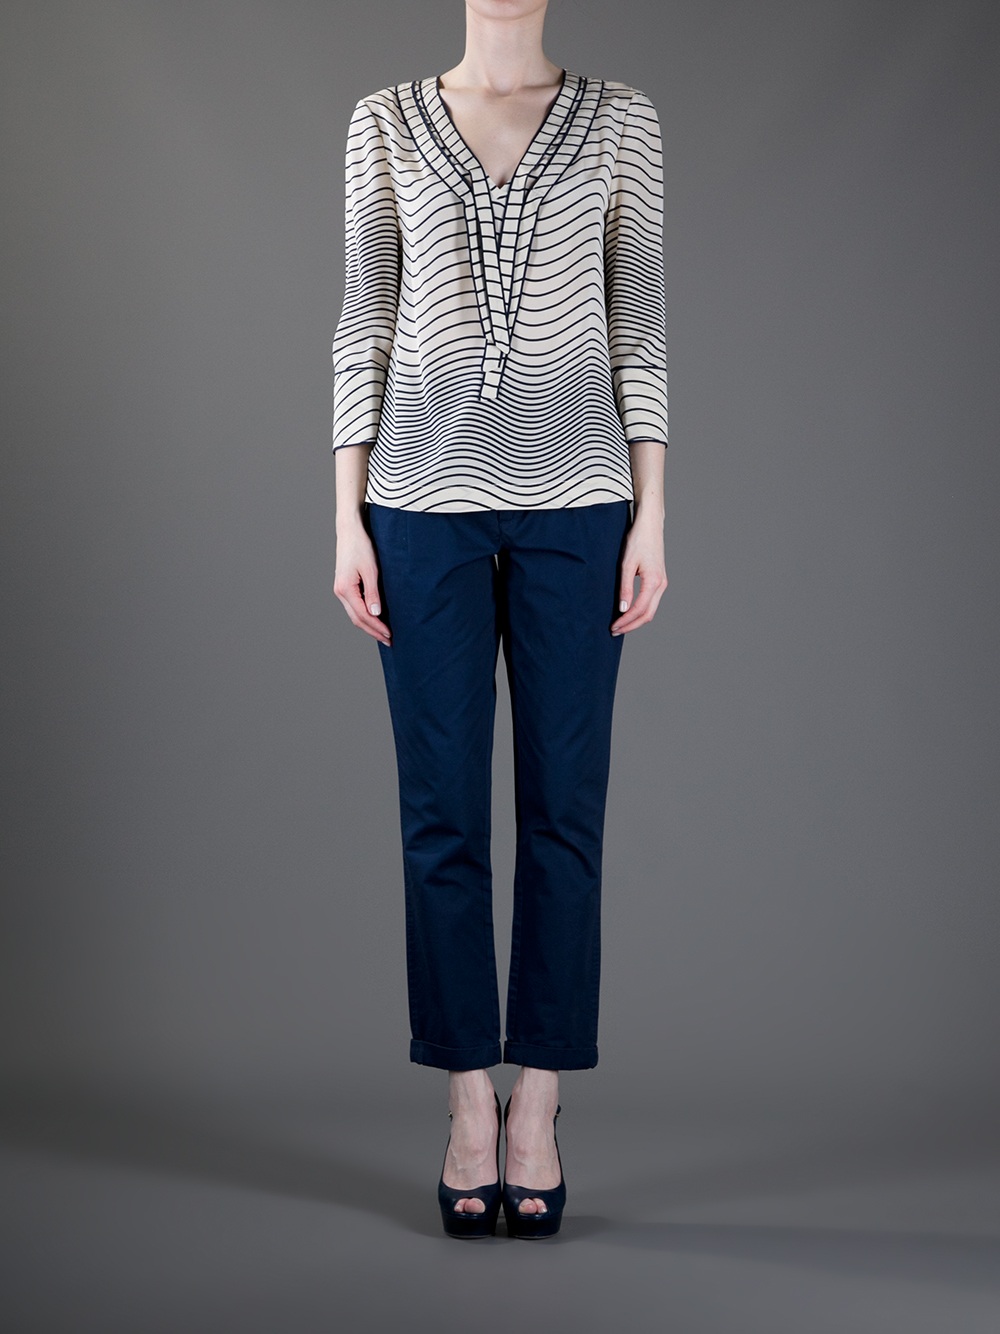 Lyst - Tory burch Striped Blouse in Natural